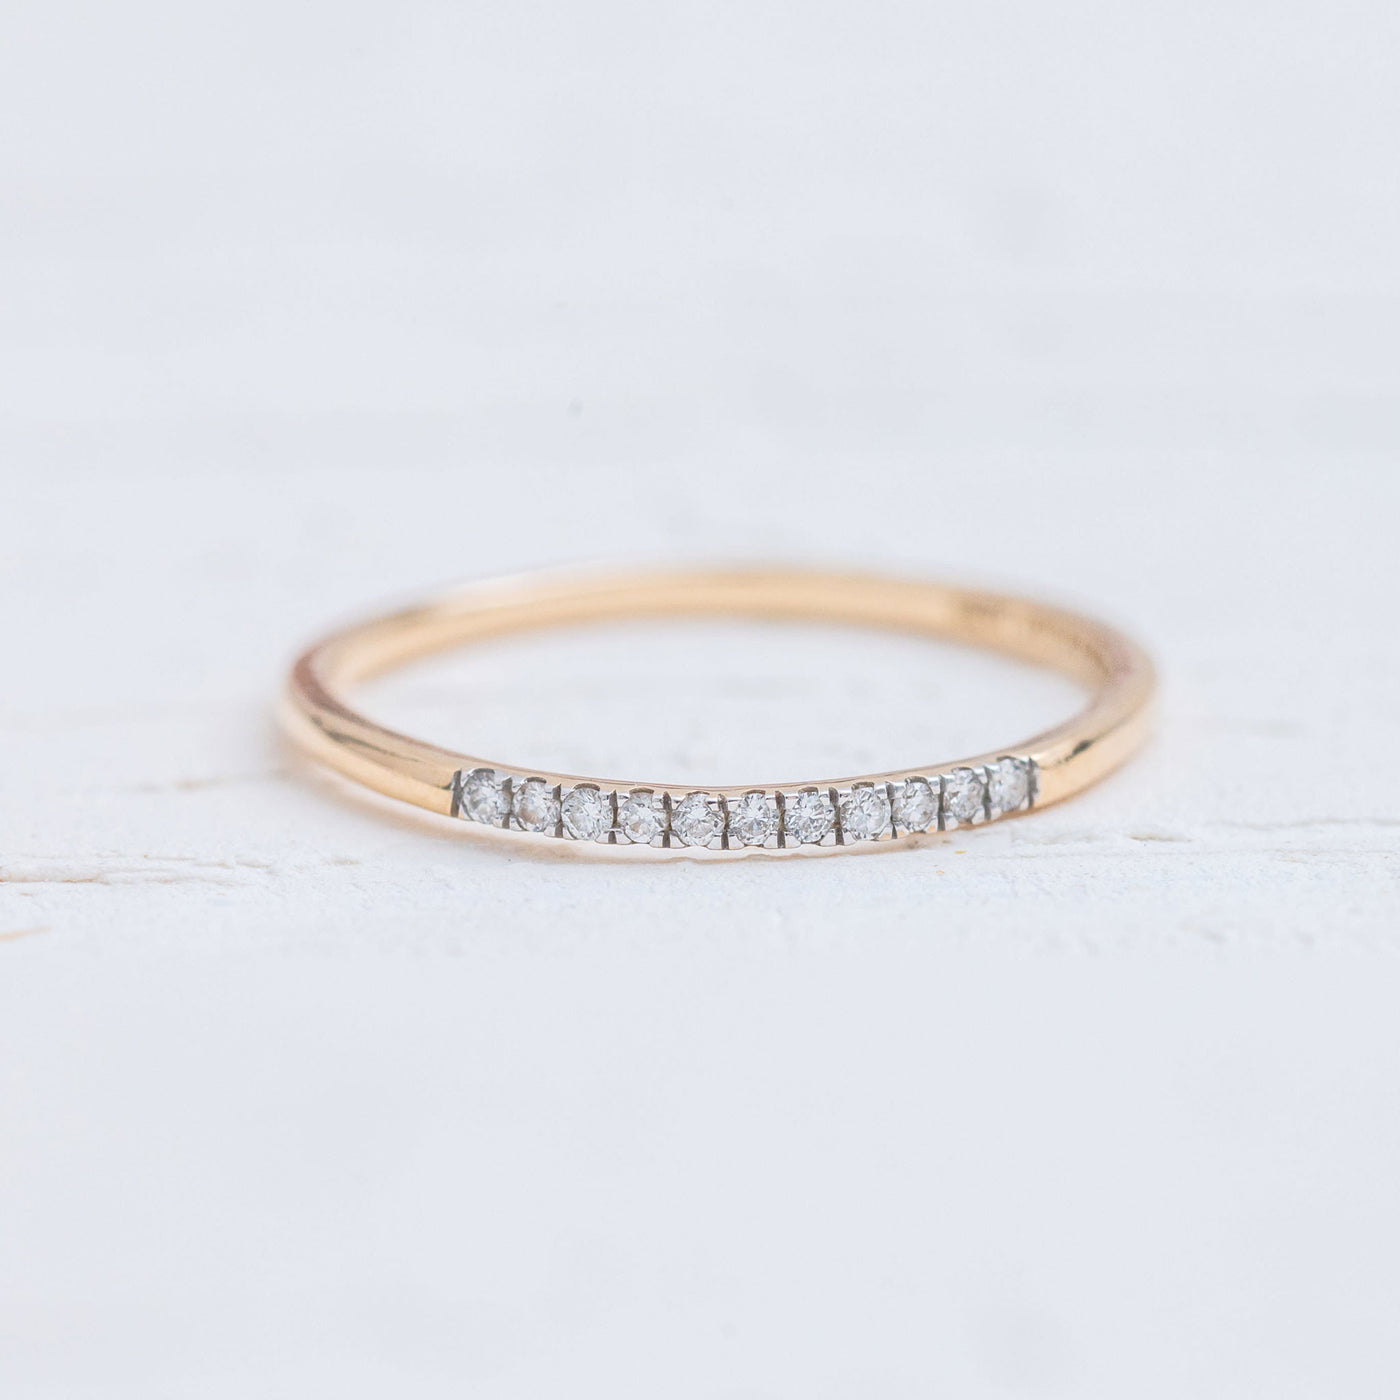 The Everyday Petit Pavé Band in 14k yellow gold